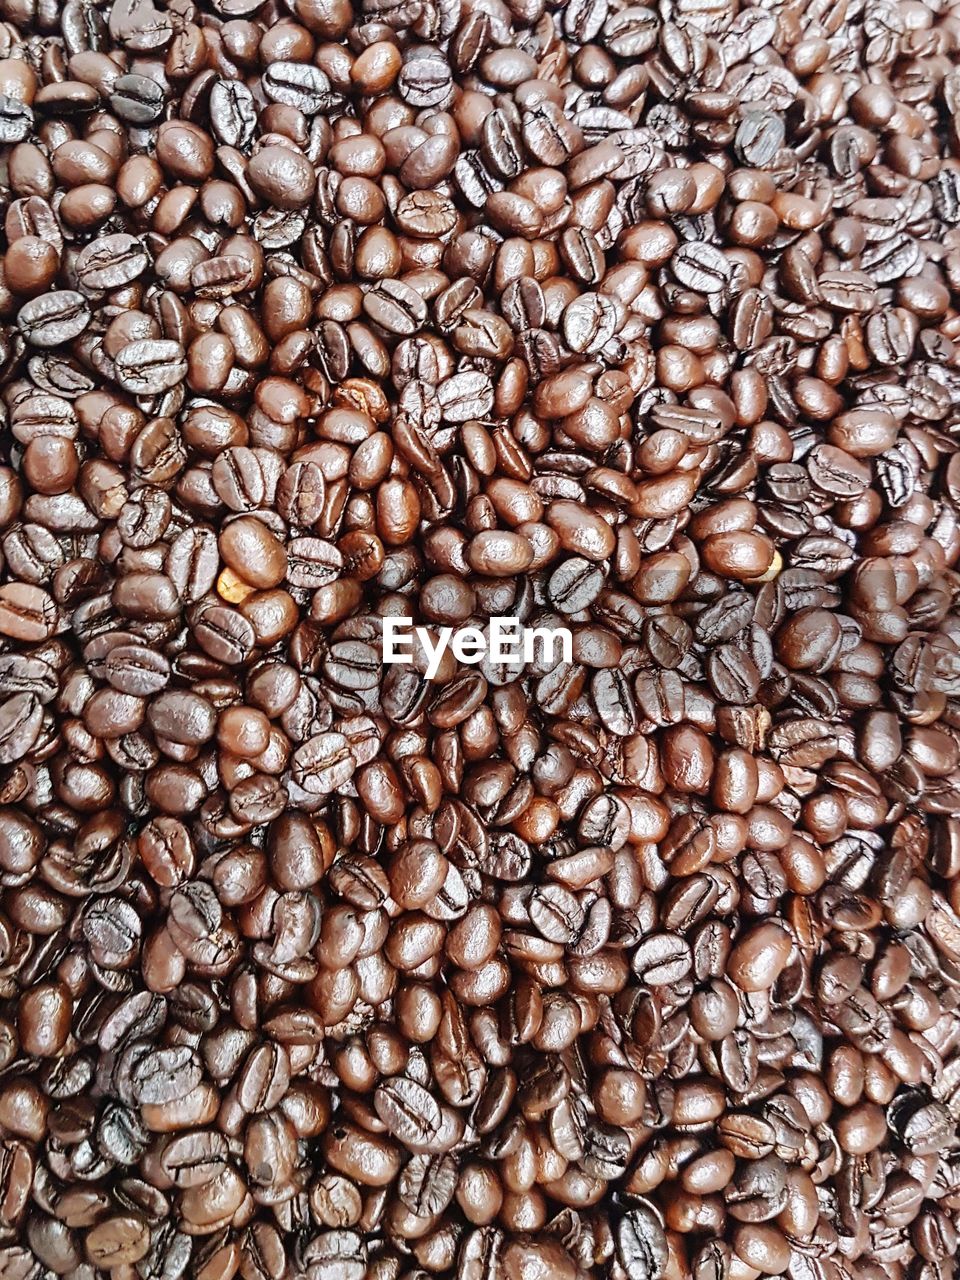 FULL FRAME SHOT OF ROASTED COFFEE BEANS IN BACKGROUND